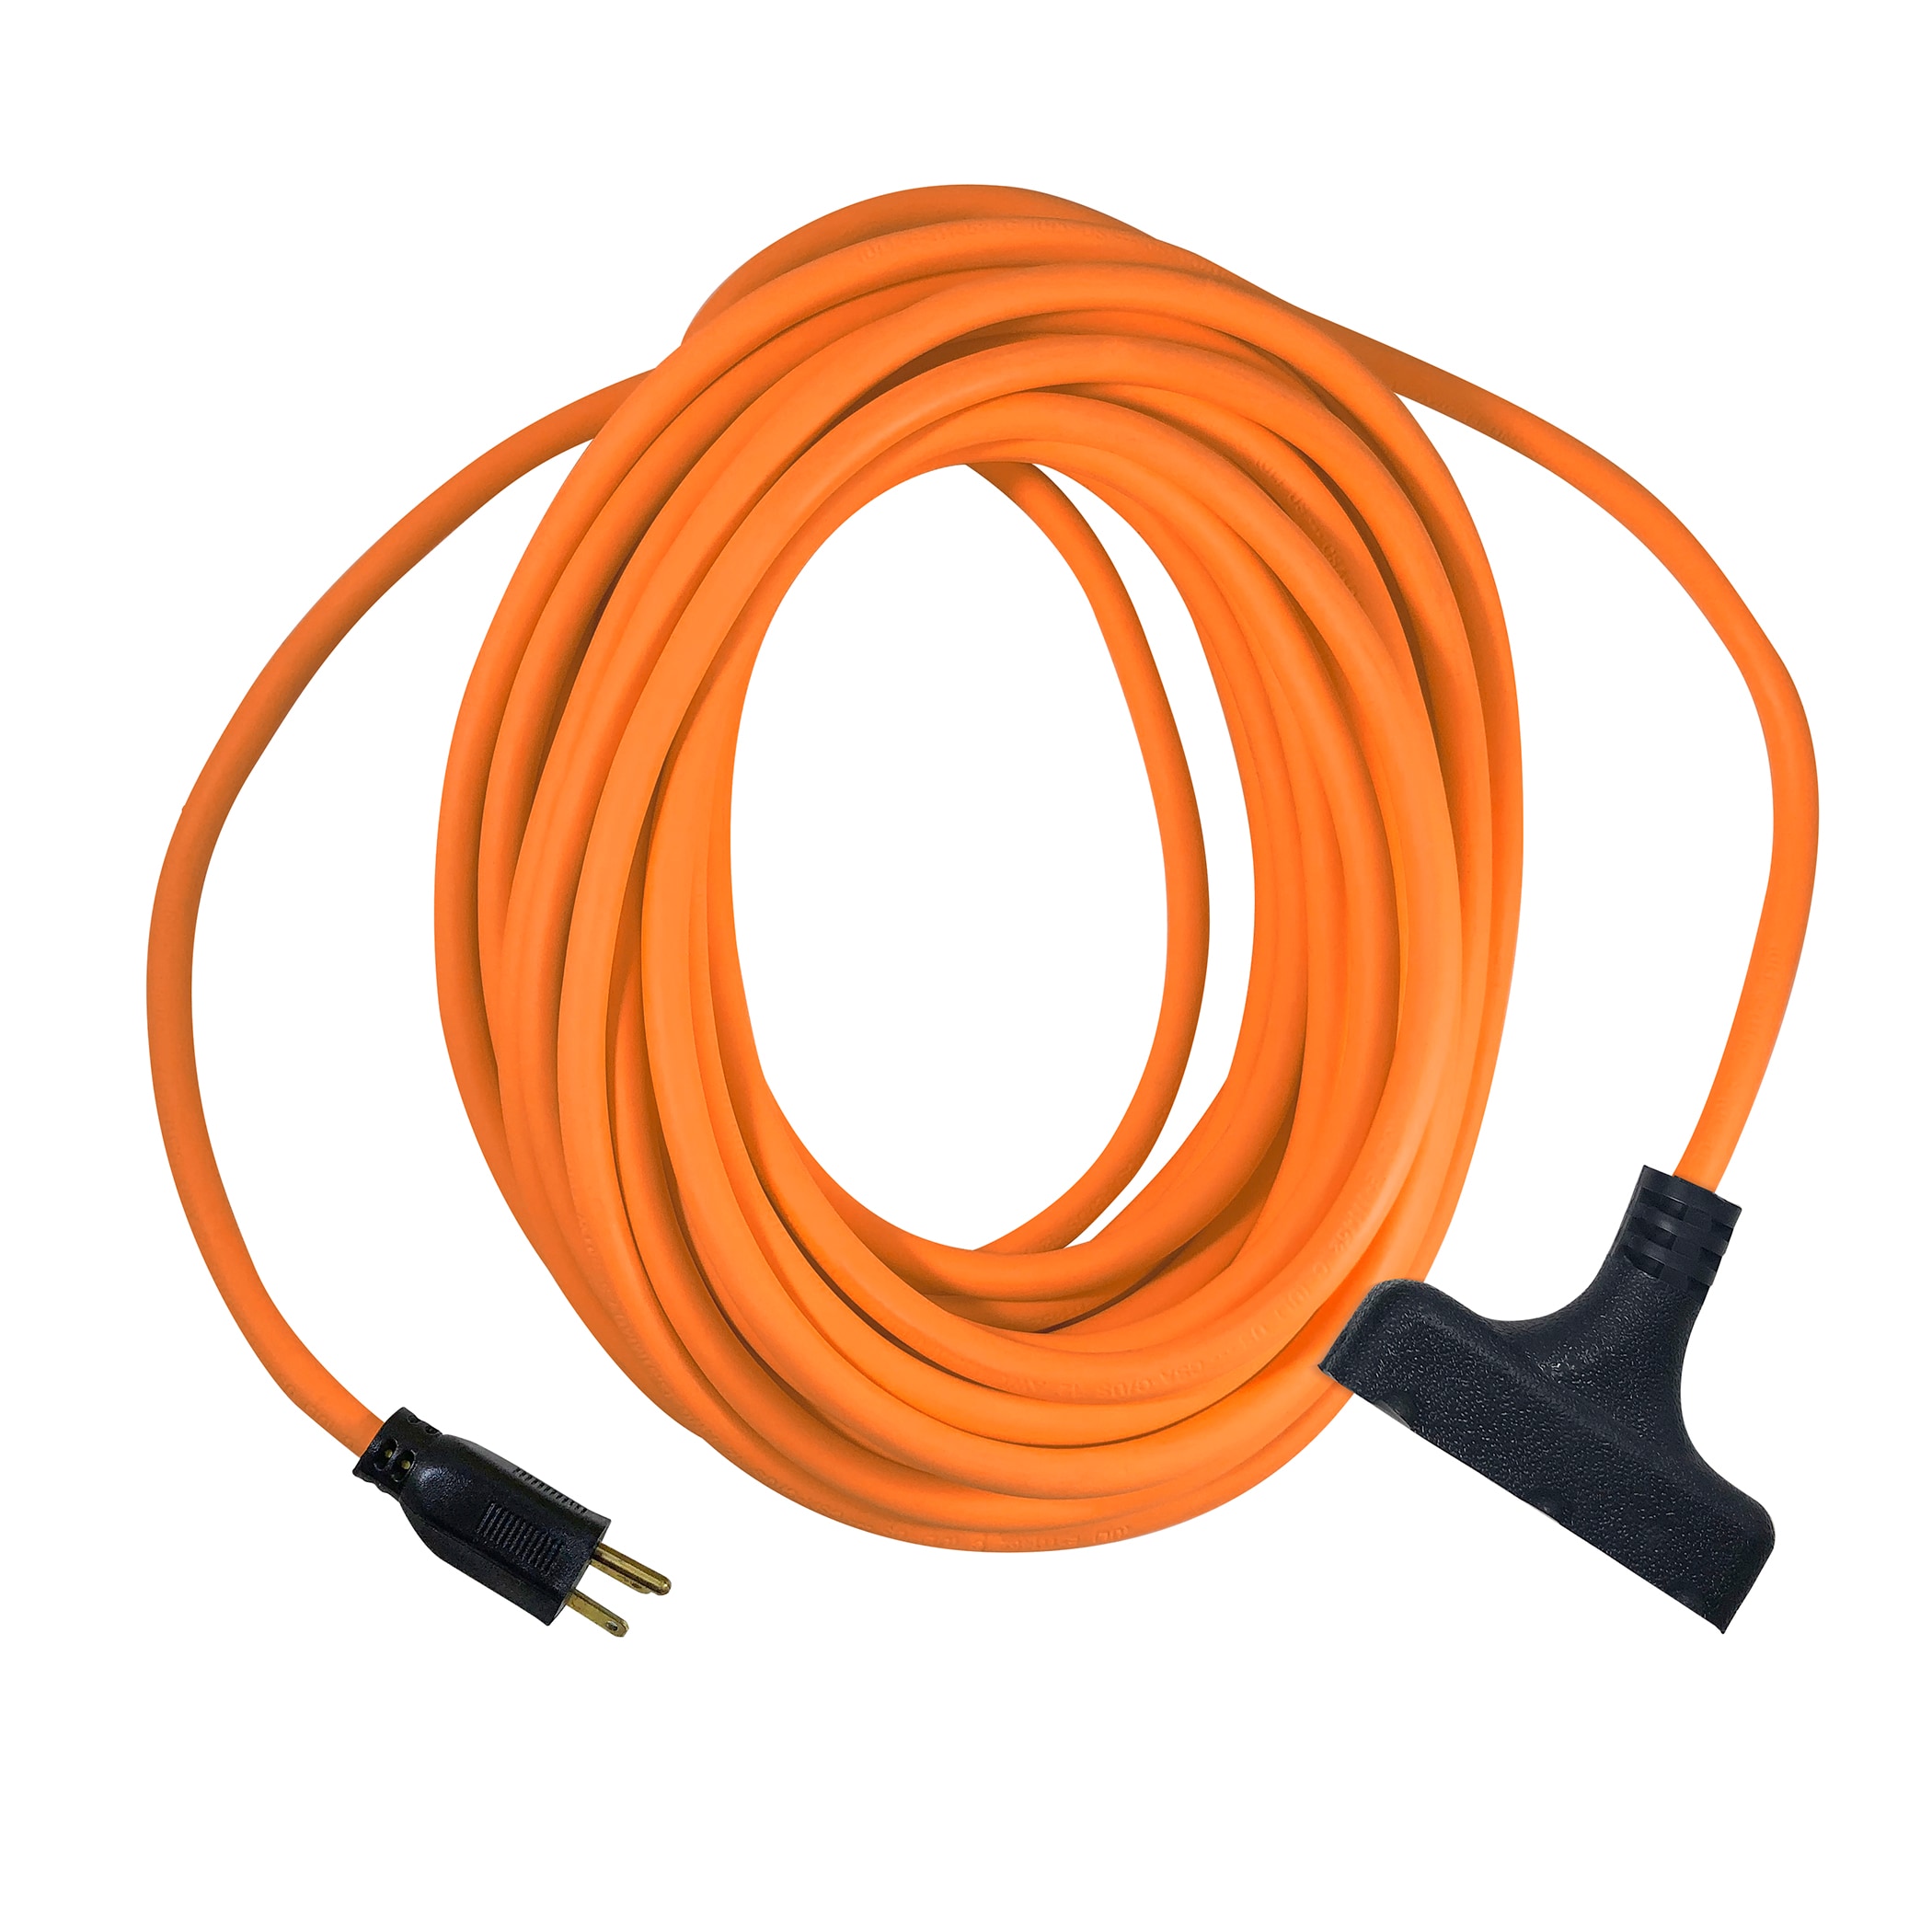  2 ft - 12 Gauge Heavy Duty Extension Cord - 3 Outlet Lighted  SJTW - Indoor/Outdoor Extension Cord by Watt's Wire - 2' 12-Gauge Grounded  15 Amp Extension Cord Splitter